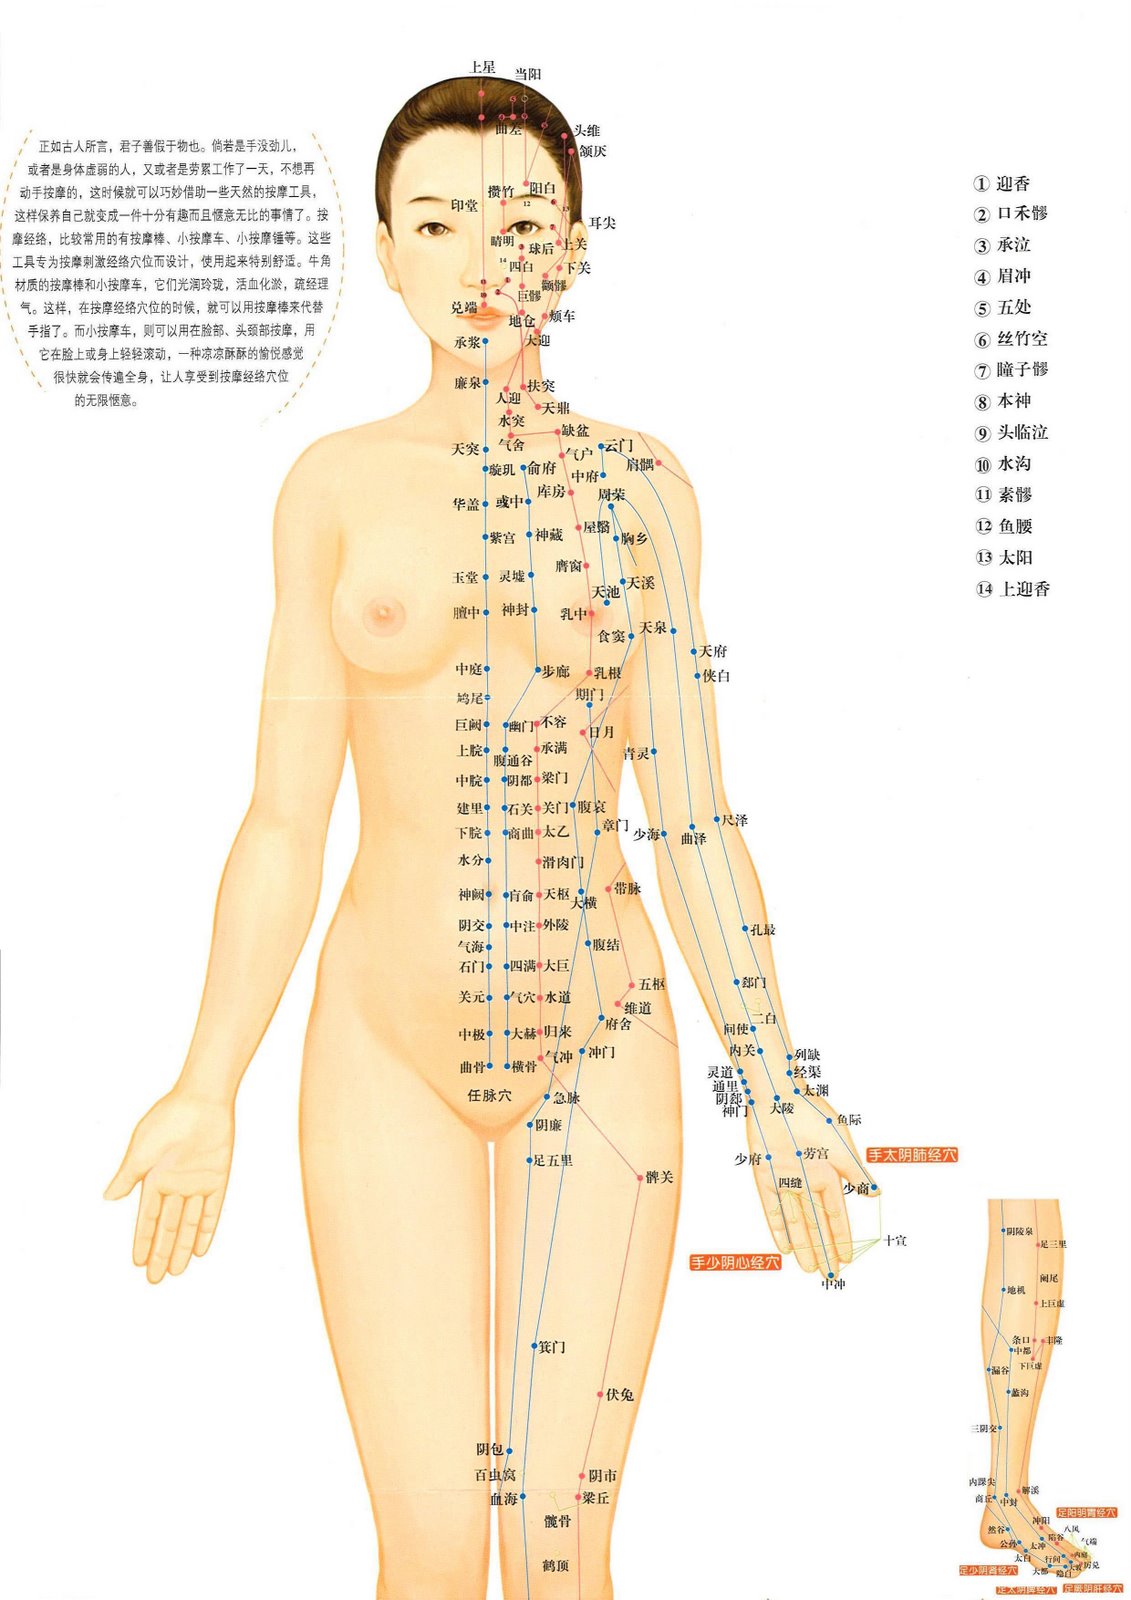 What are the acupuncture points on the body?